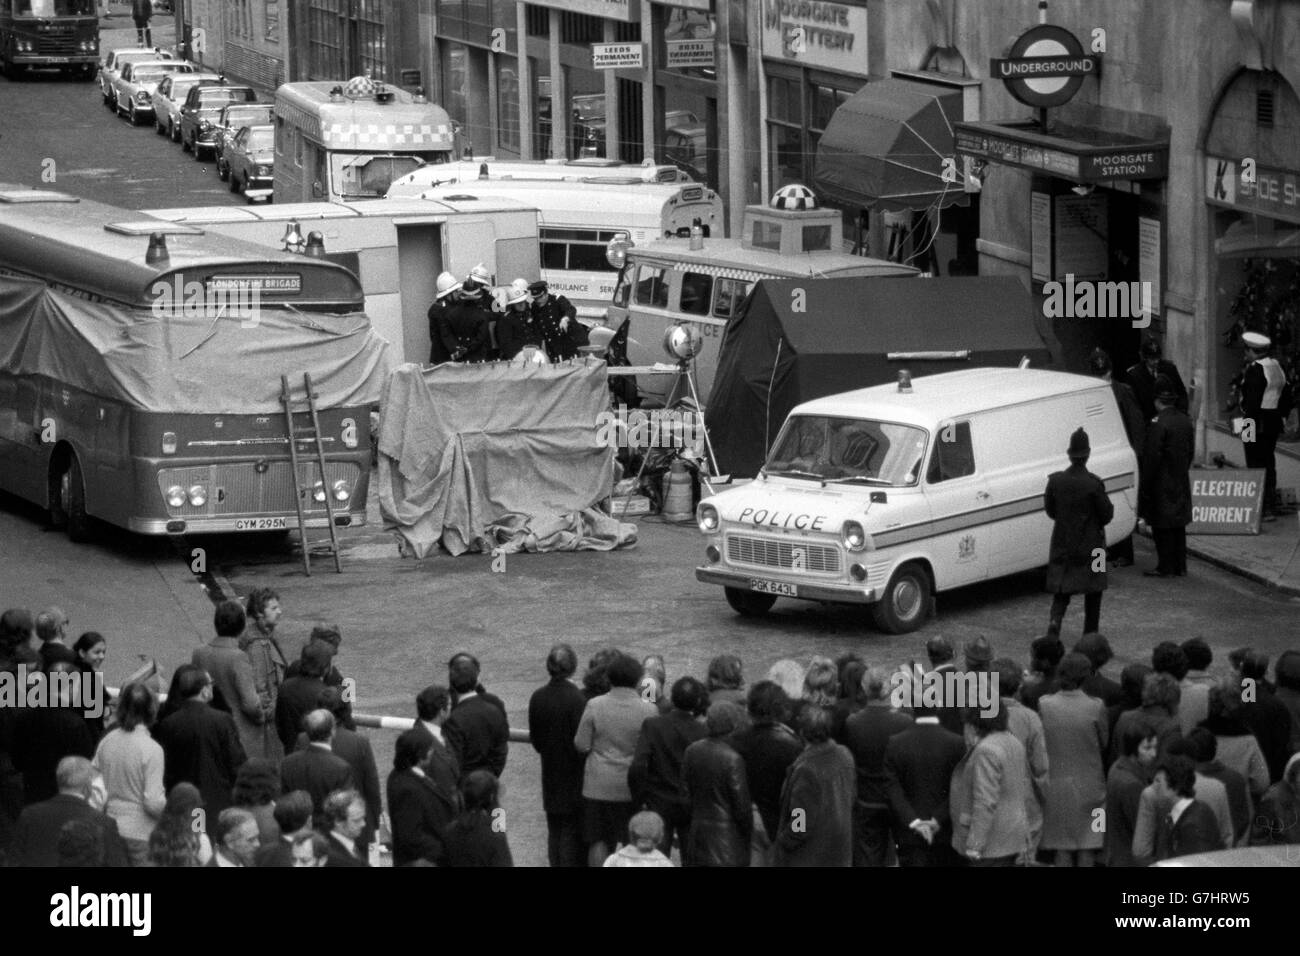 The cordoned-off area outside Moorgate station as rescue teams try to free trapped bodies from the wrecked front carriage of the disaster train. Stock Photo